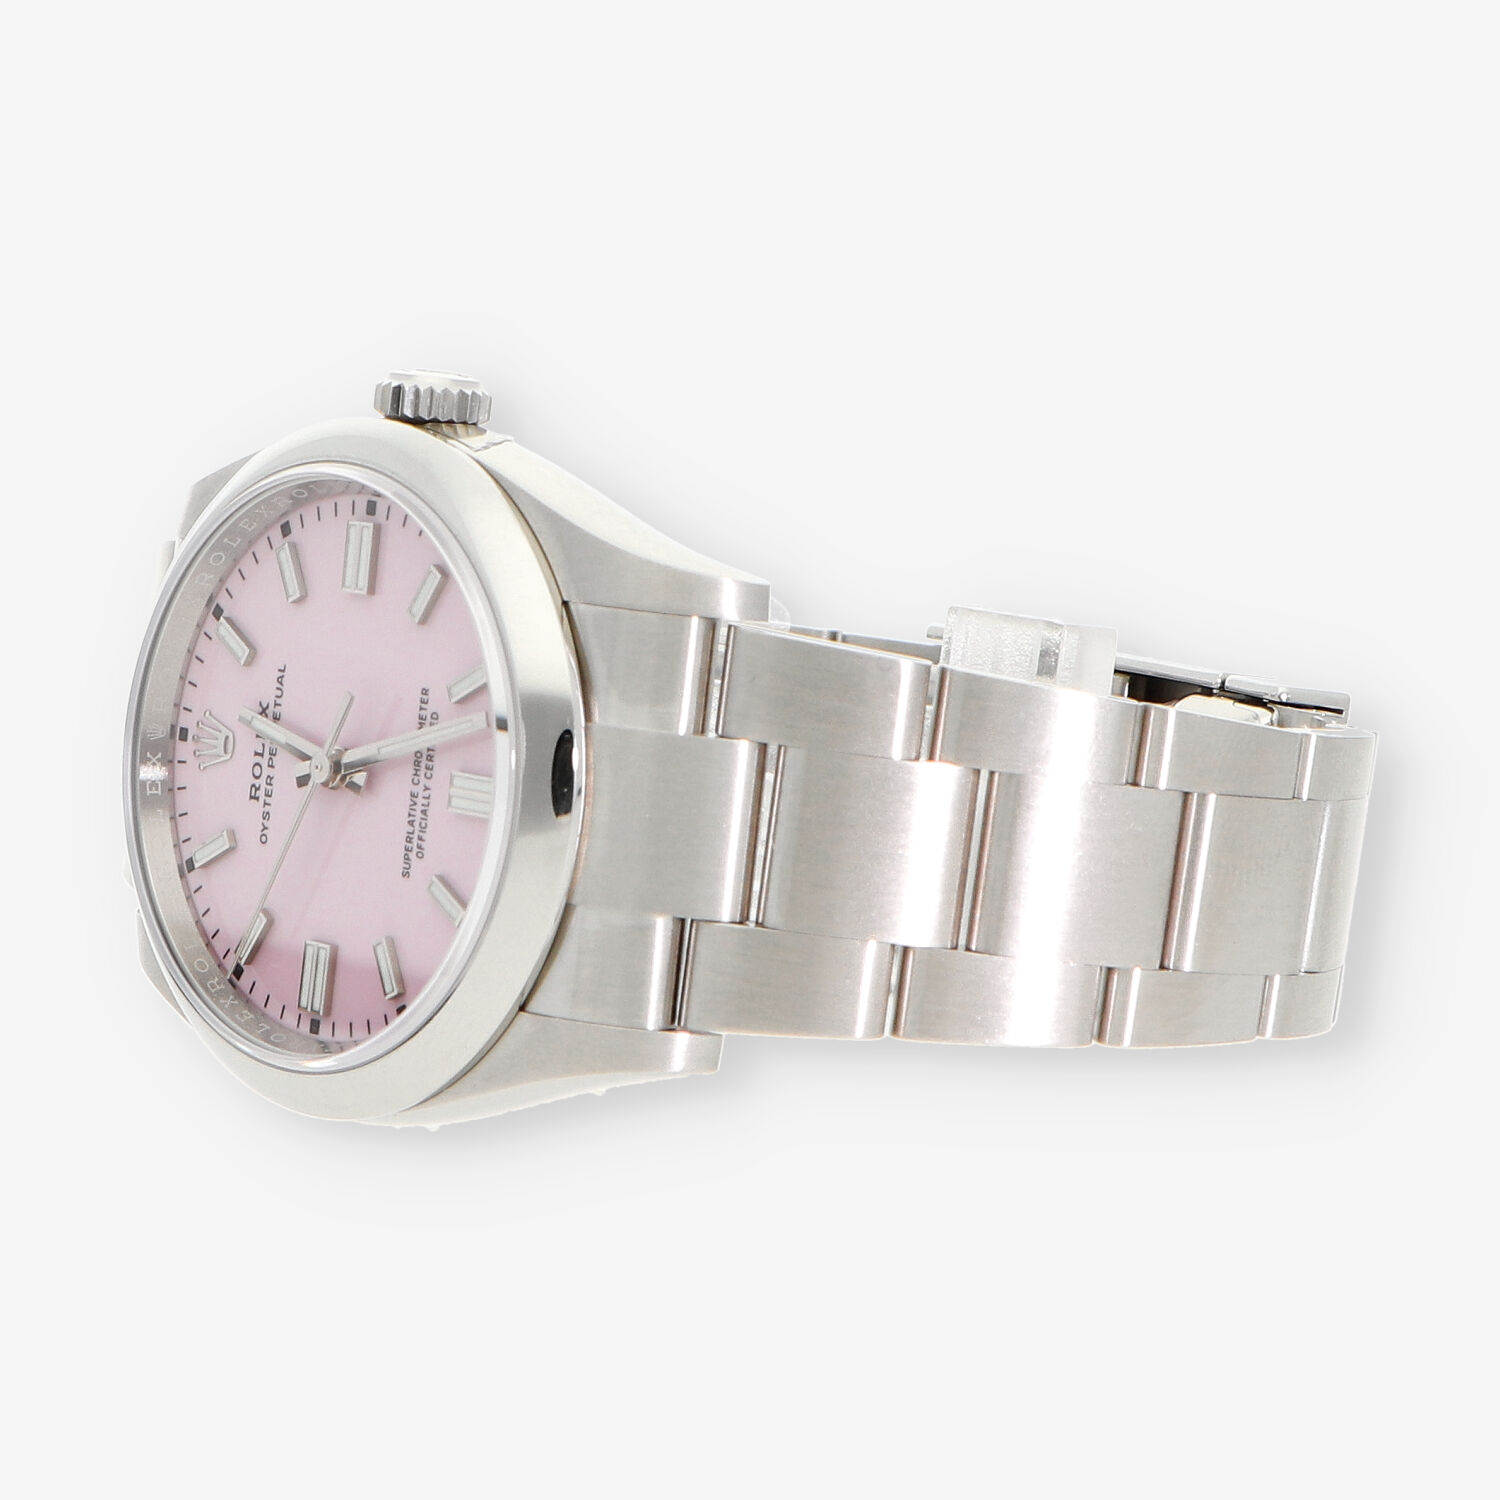 Rolex Oyster Perpetual 36 Candy Pink caja y documentos